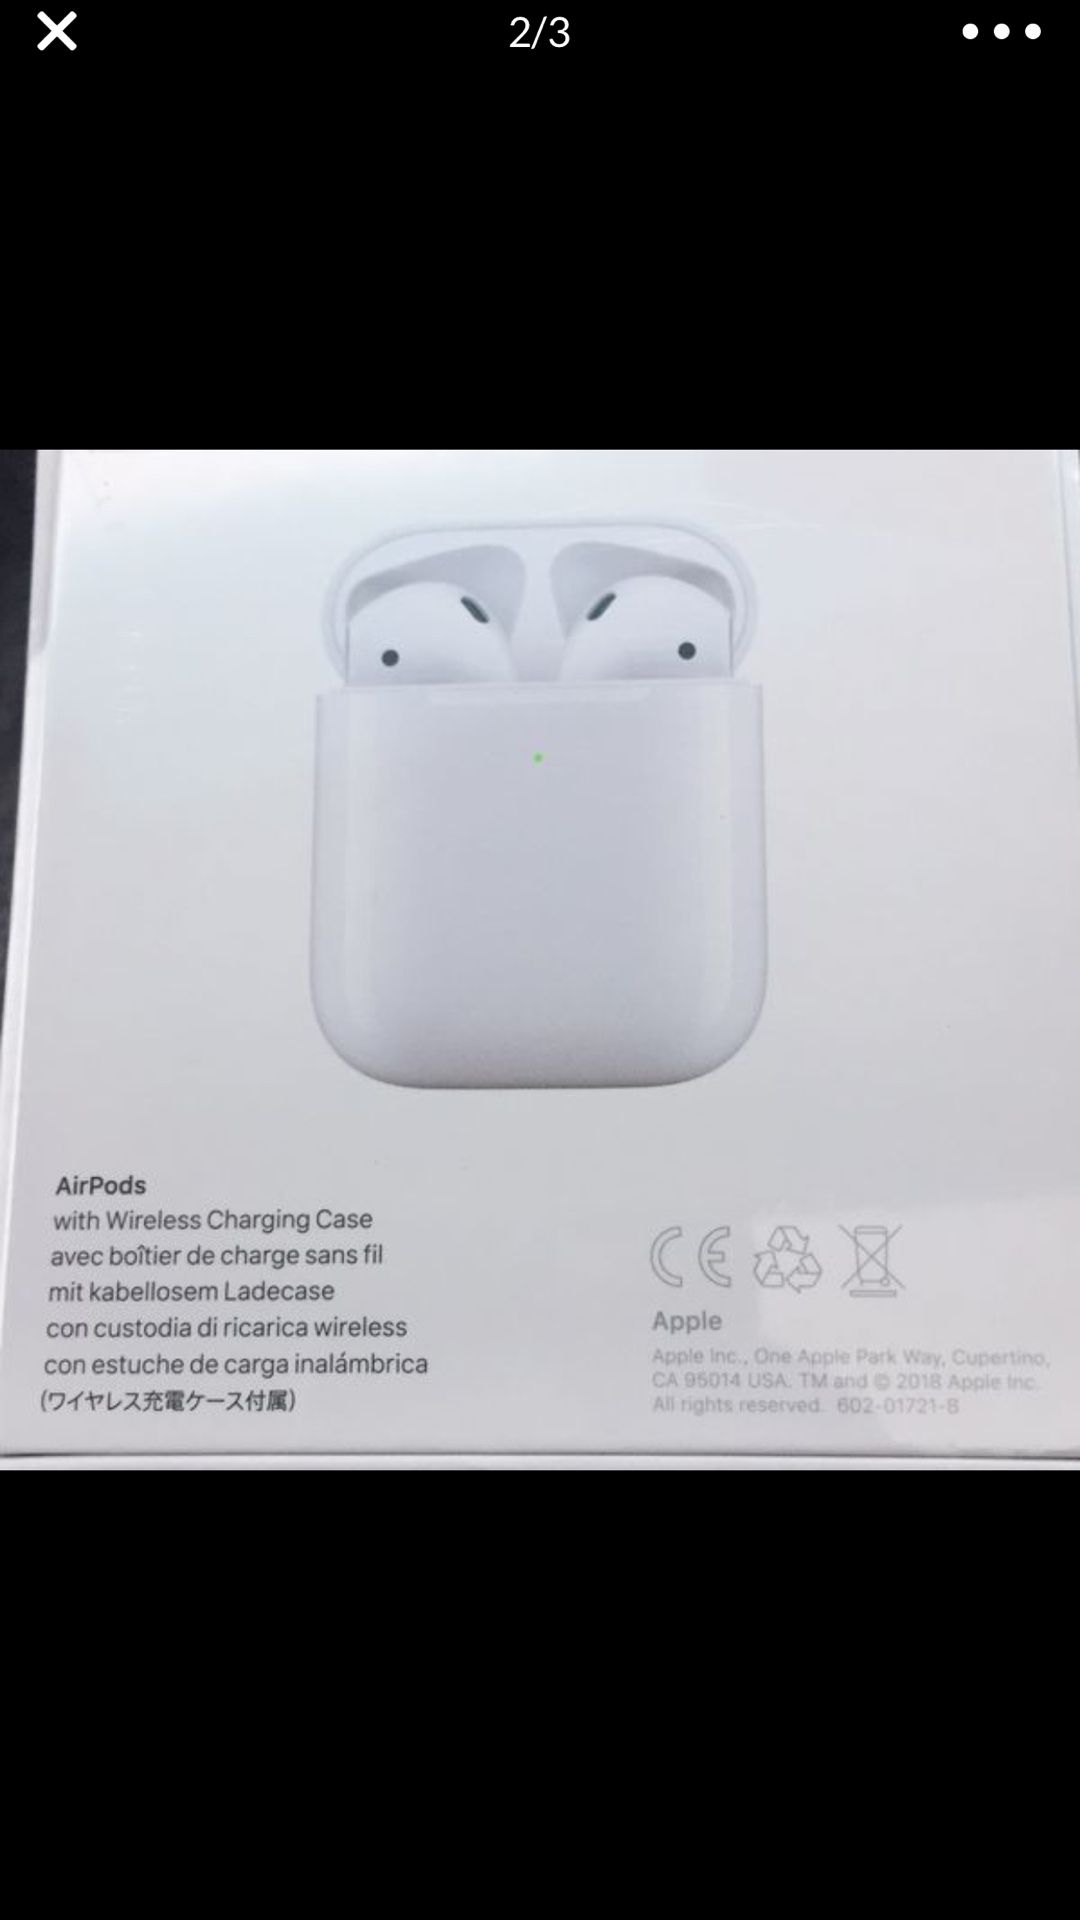 Apple AirPods with wireless charging case sealed